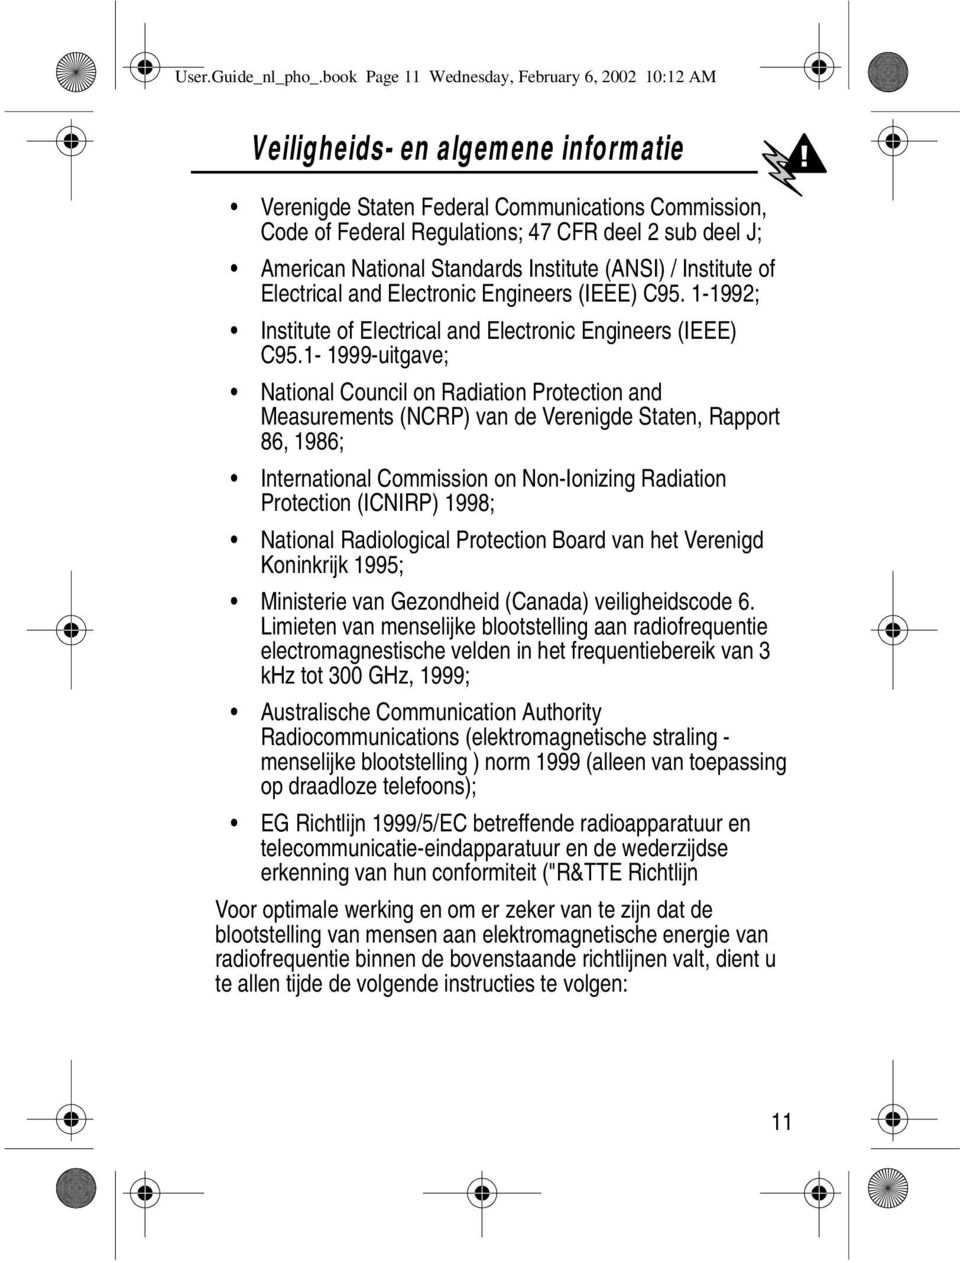 American National Standards Institute (ANSI) / Institute of Electrical and Electronic Engineers (IEEE) C95. 1-1992; Institute of Electrical and Electronic Engineers (IEEE) C95.